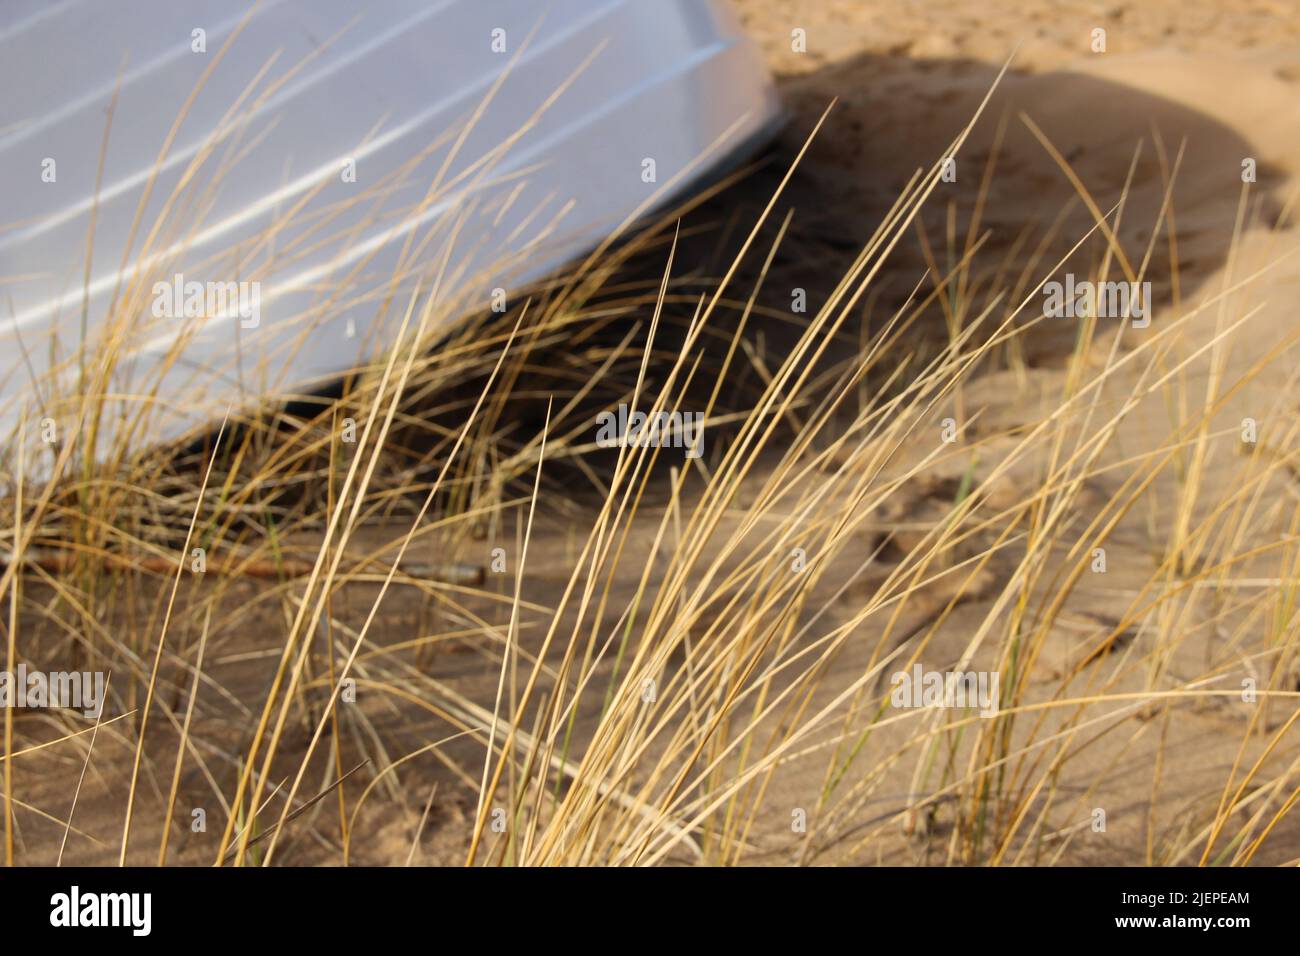 A white boat lays upside-down behind dry reeds. Dry grass and a blurred fisherman's boat in the background. Stock Photo